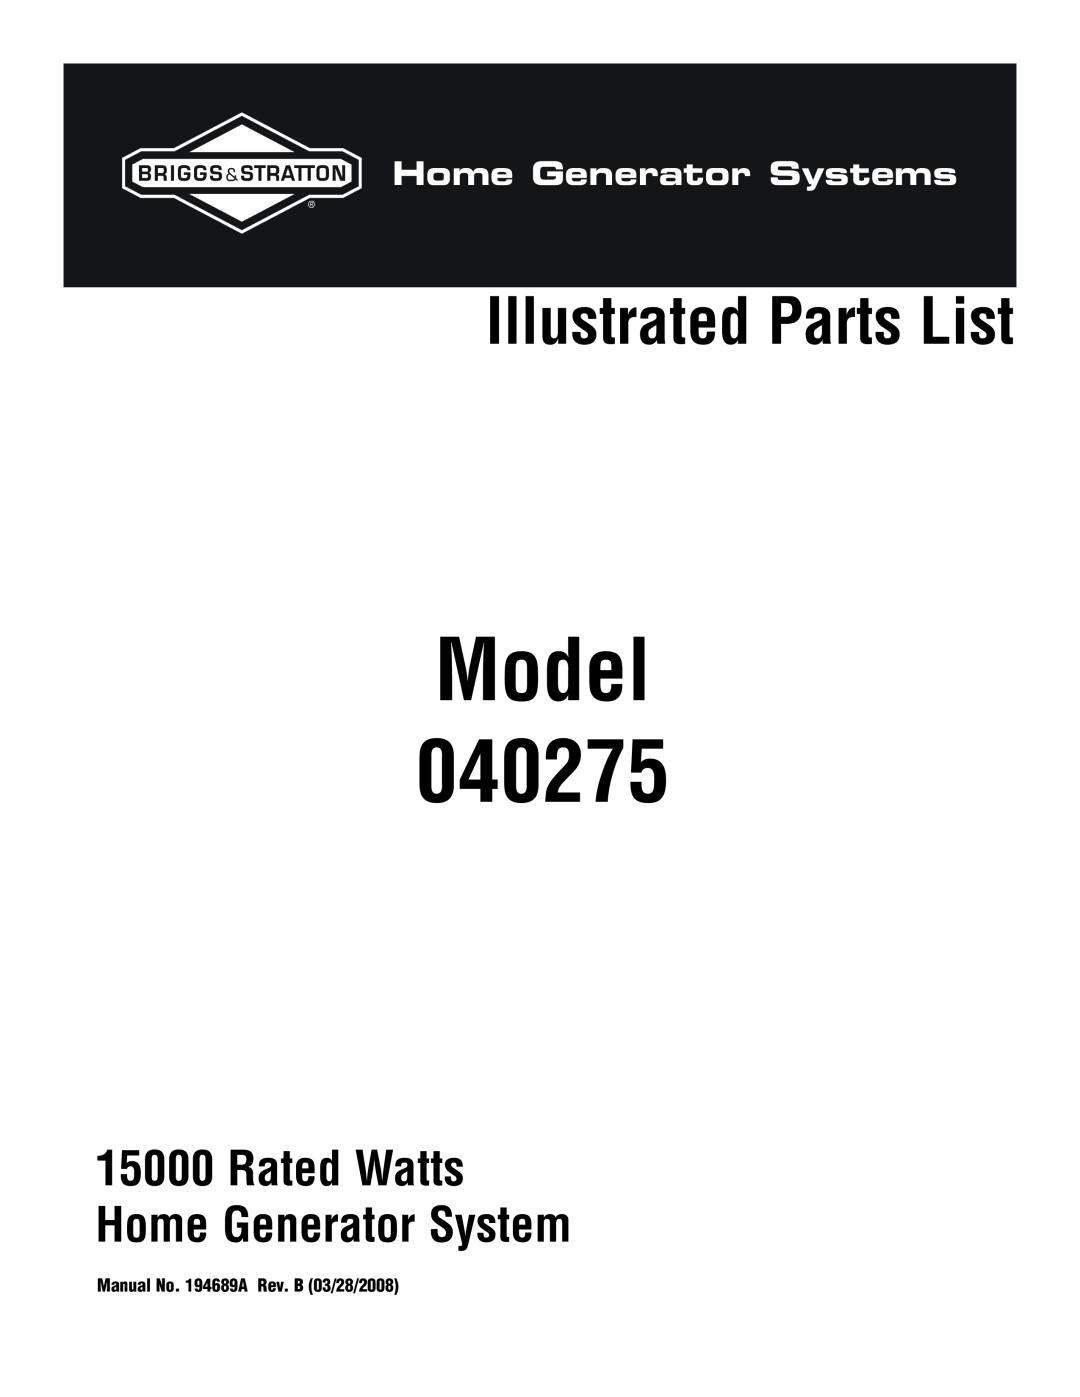 Briggs & Stratton 40275 manual Model, Illustrated Parts List, Rated Watts Home Generator System, Home Generator Systems 